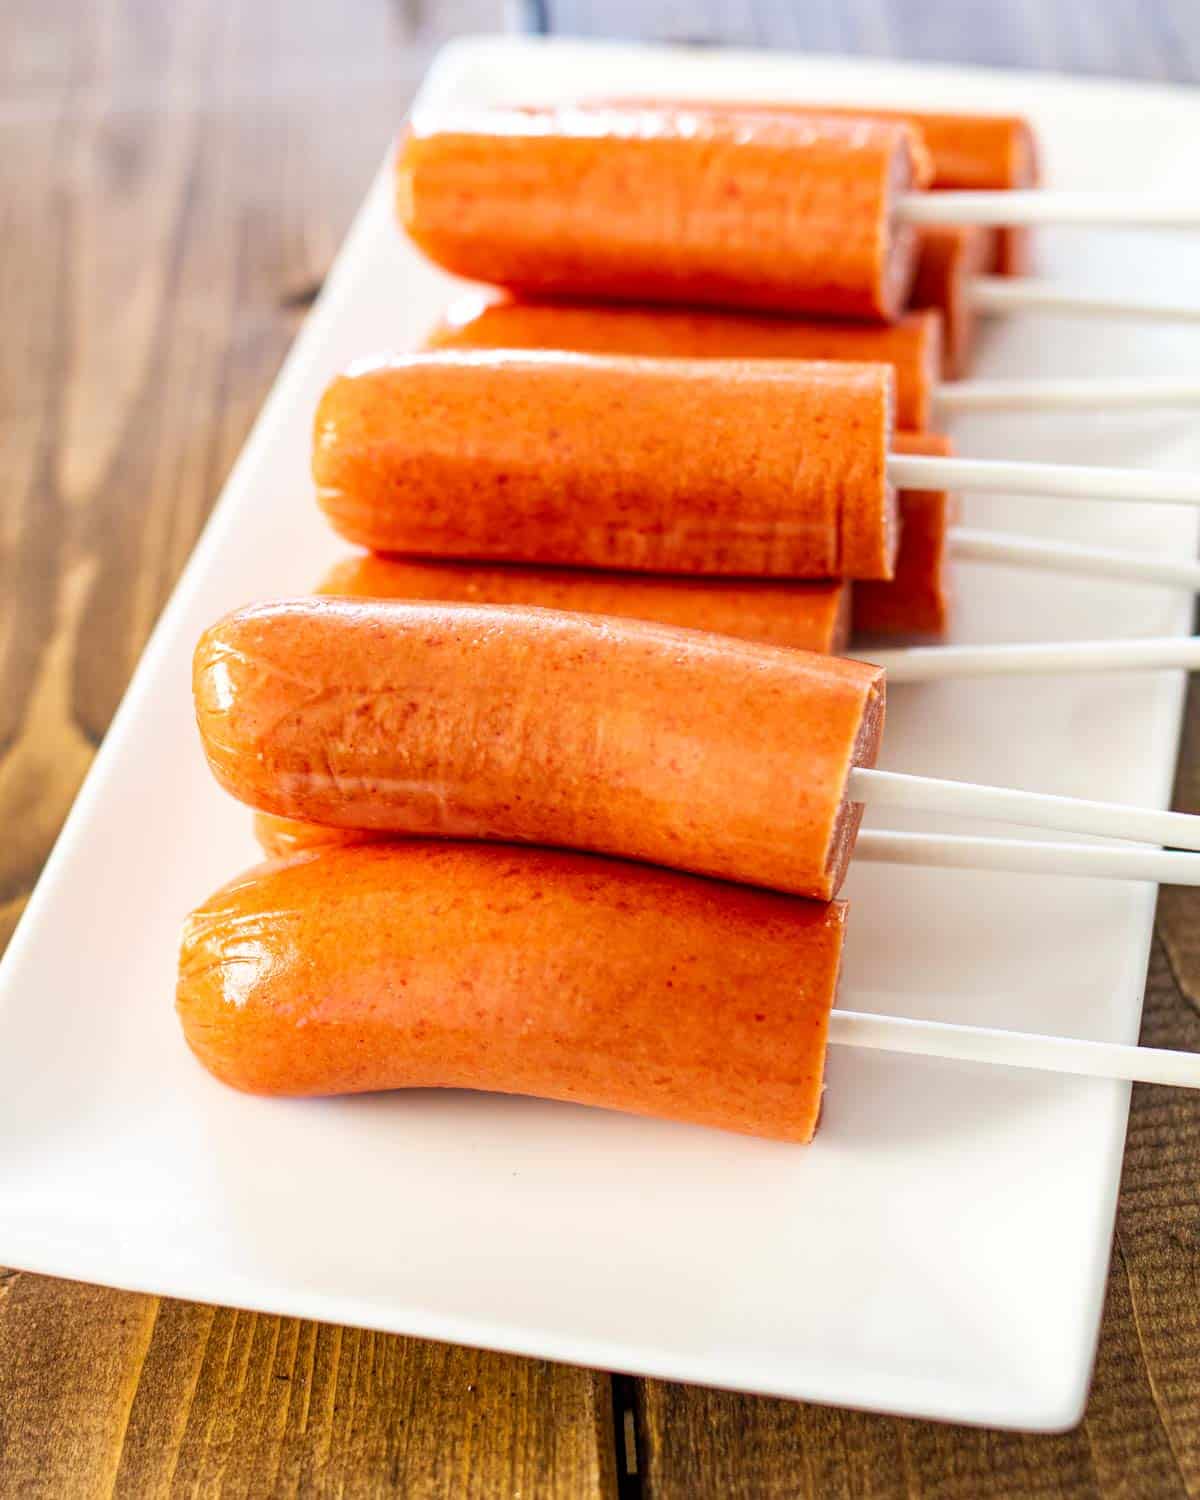 hot dogs cut in half with a lollipop stick in them.